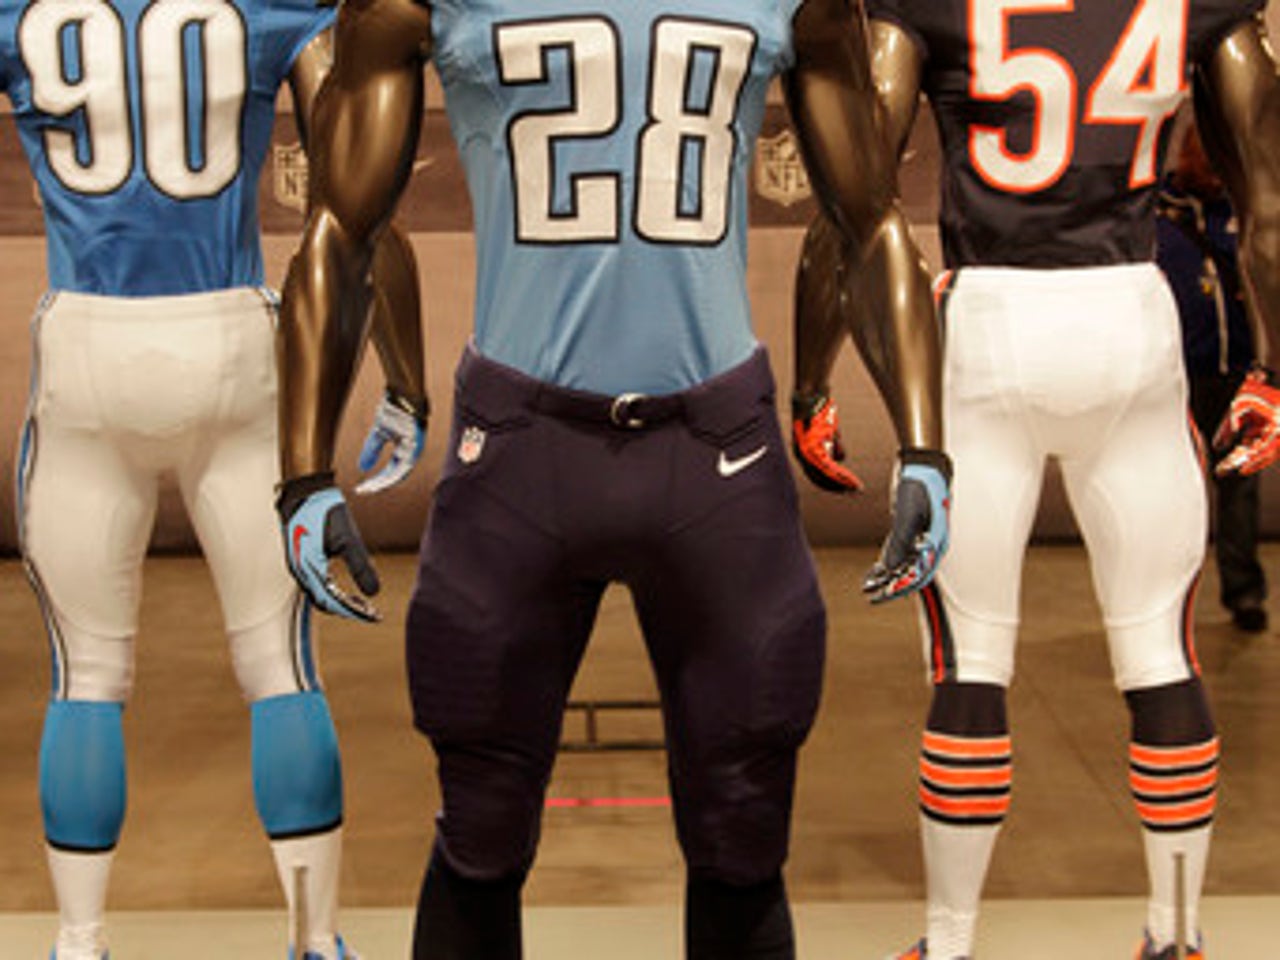 Where do Commanders uniforms rank among Nike NFL redesigns as of 2022?